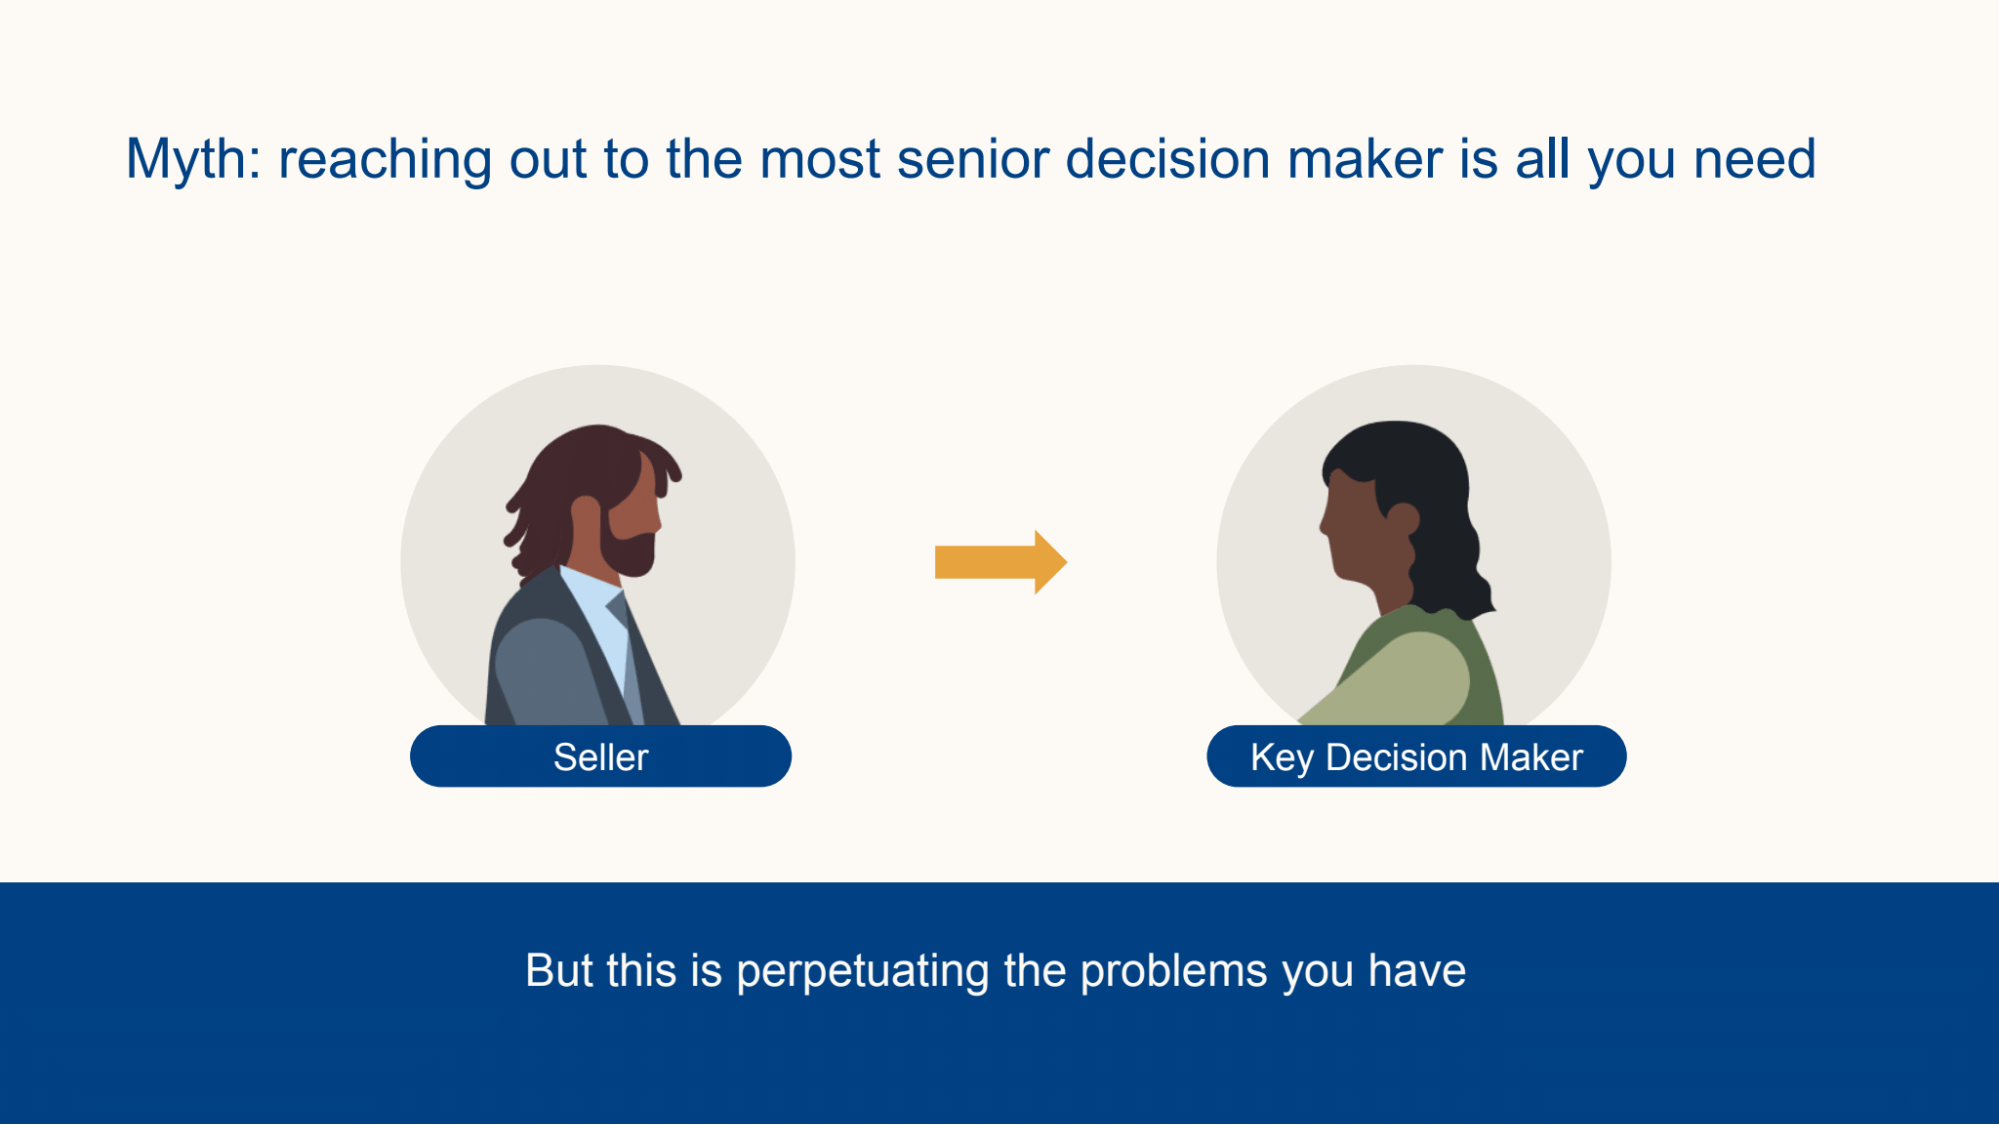 A presentation slide with images of two people facing each other. One is labeled "Seller", the other "Key Decision Maker". The text says: "Myth: Reaching out to the most senior decision maker is all you need. But this is perpetuating the problems you have."